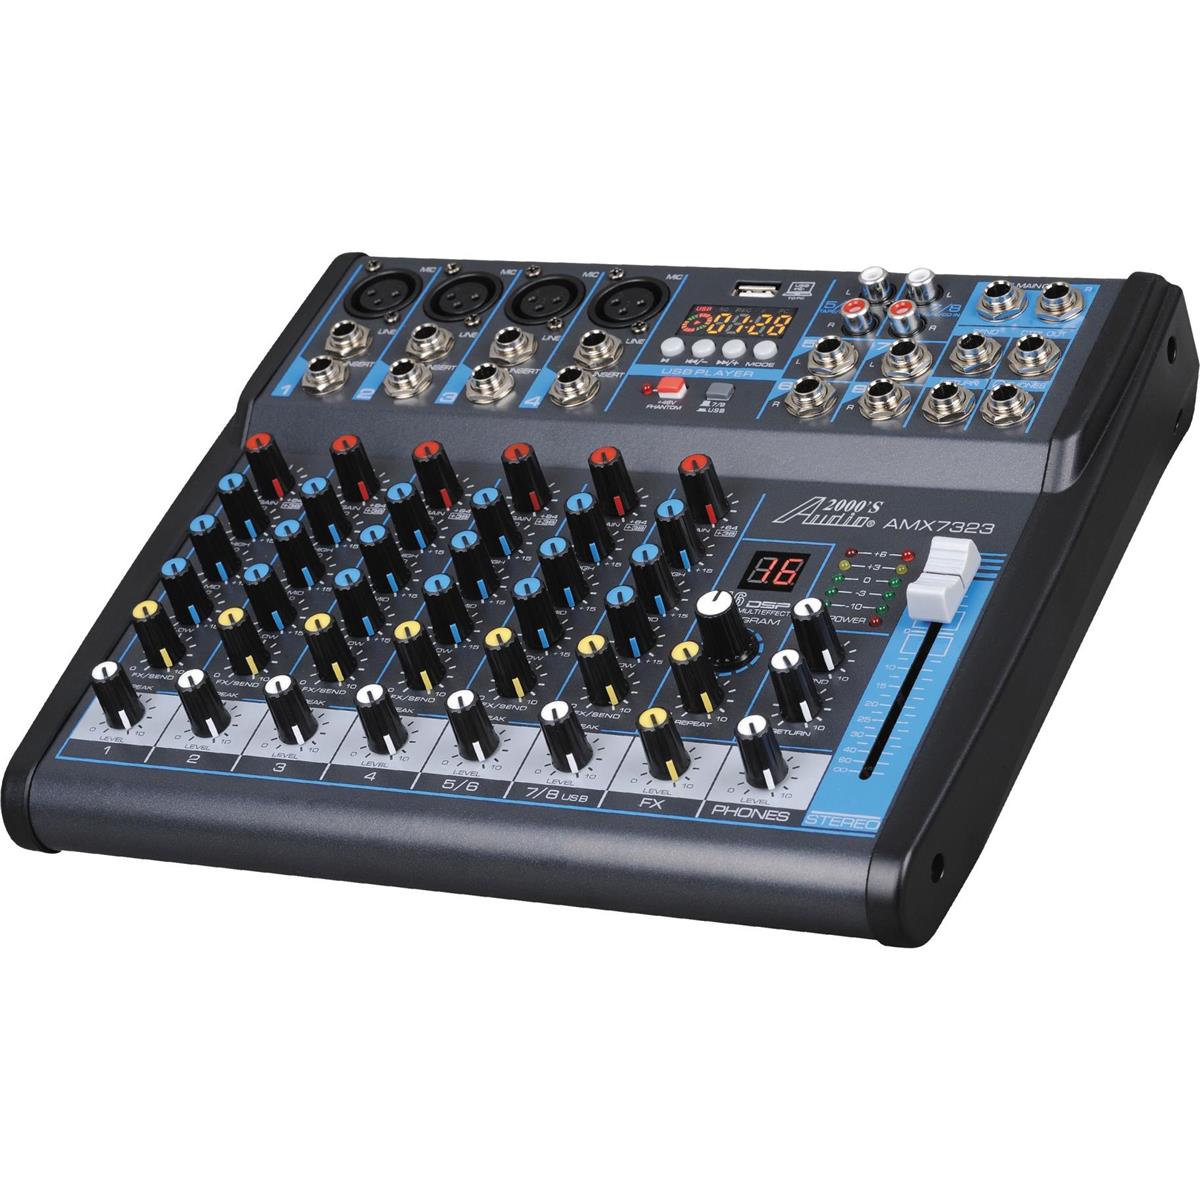 Image of Audio 2000s AMX7323 8-CH Audio Mixer with USB